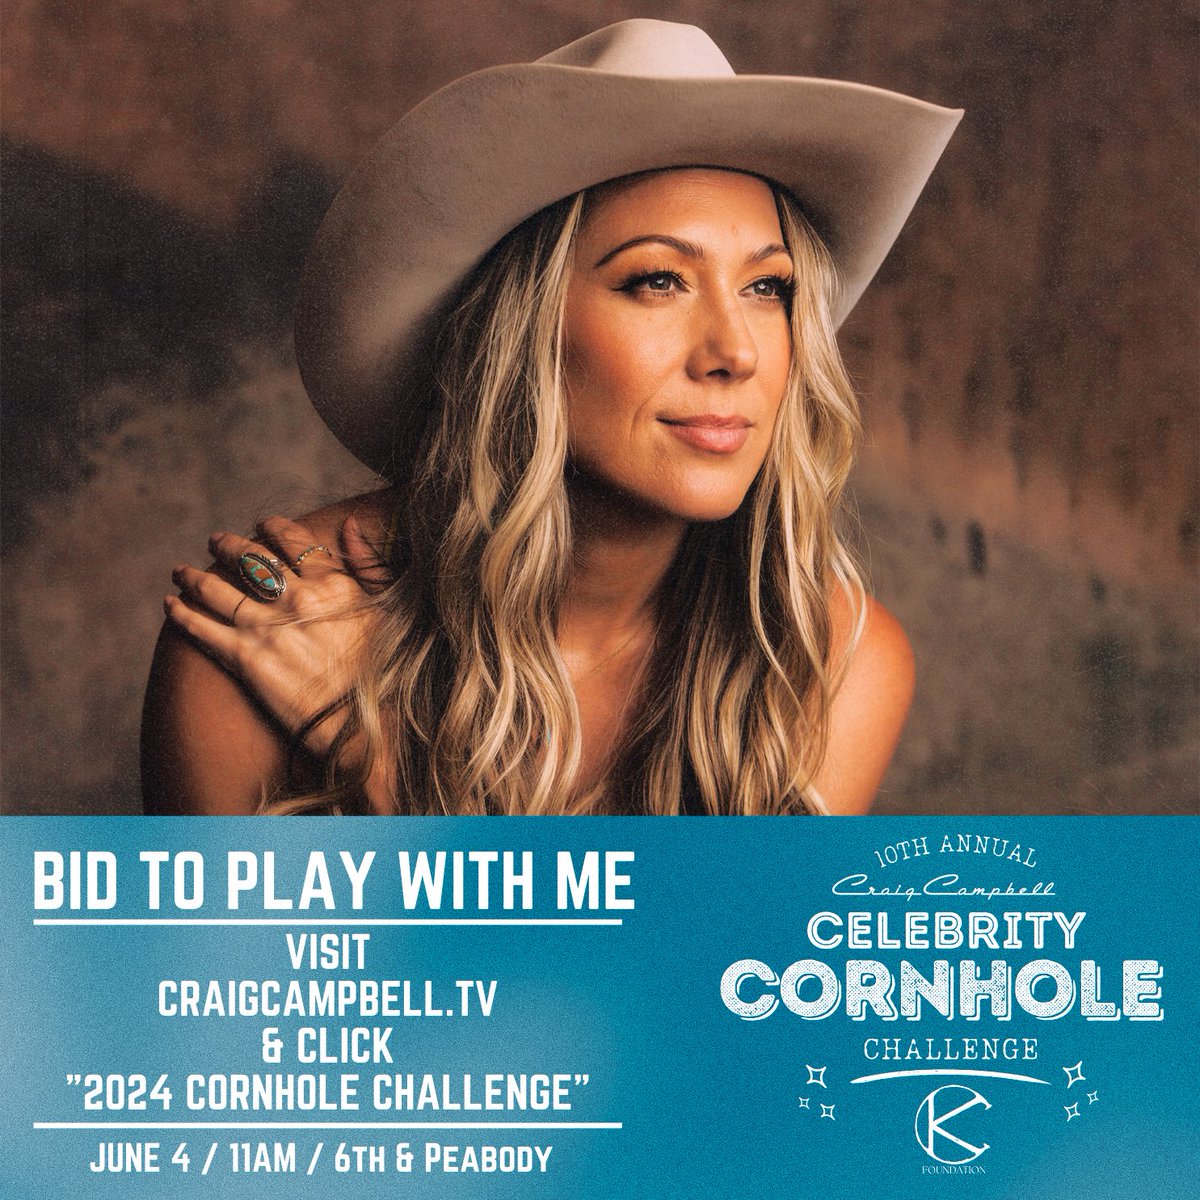 If you’re in town for CMA fest, you should come play corn hole with me and some other amazing artists here in Nashville for @craigcampbelltv’s 10th Annual Celebrity Cornhole Challenge! ☺️🌽 It starts at 11am on 6/4 at 6th & Peabody and it’s for a really great cause. To get more